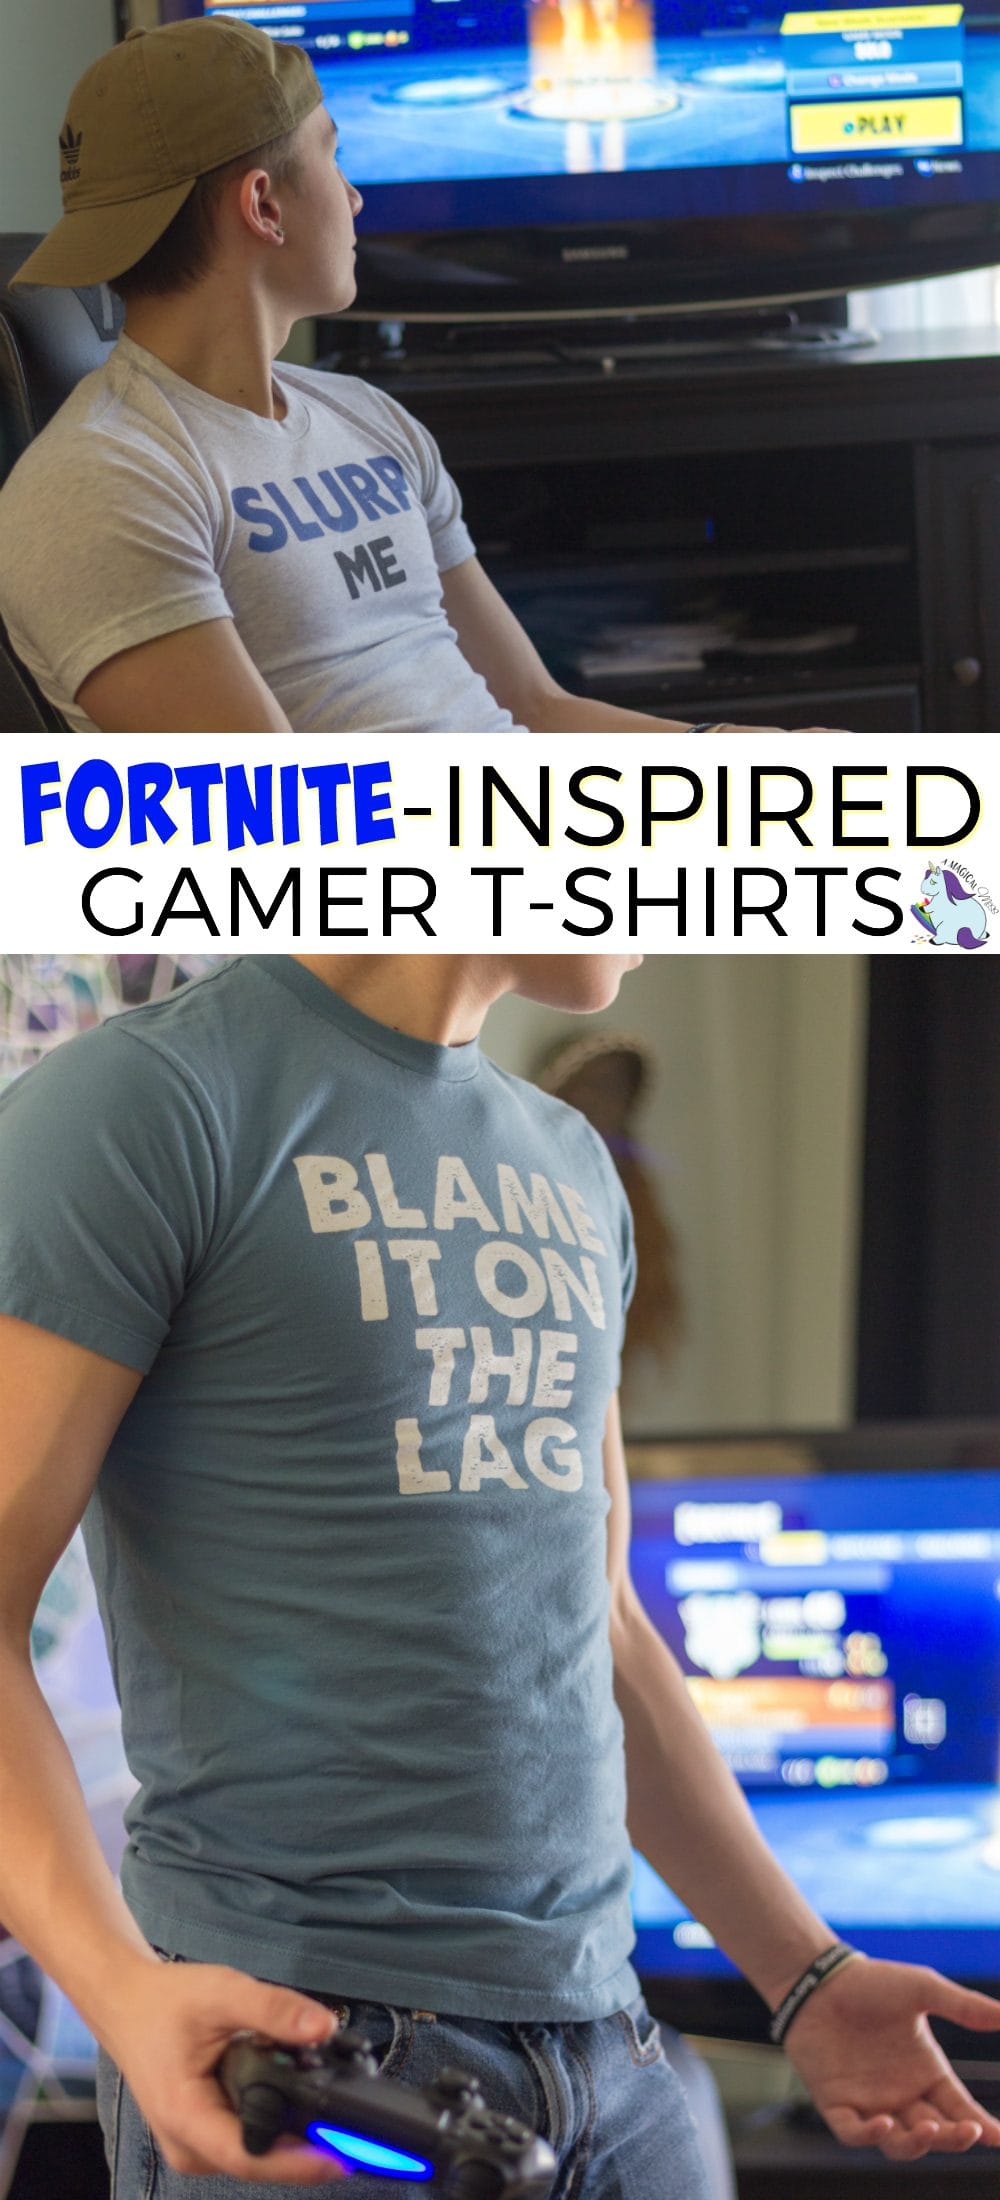 Funny Gaming T-Shirts Based on Things Said in Fortnite